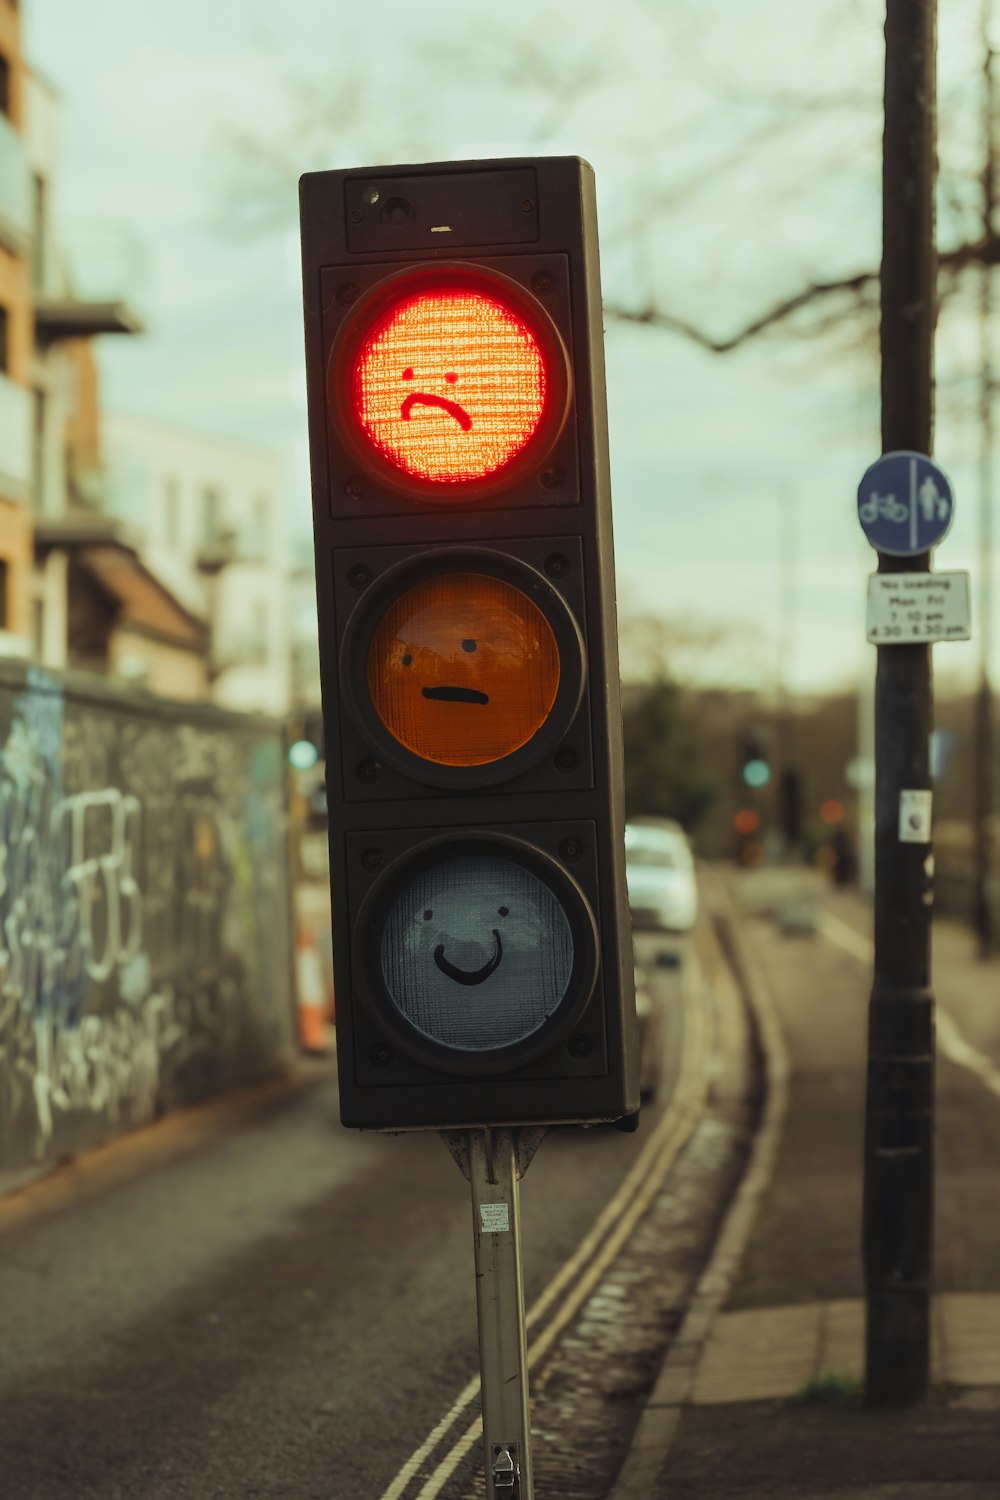 a traffic light with a smiley face drawn on it